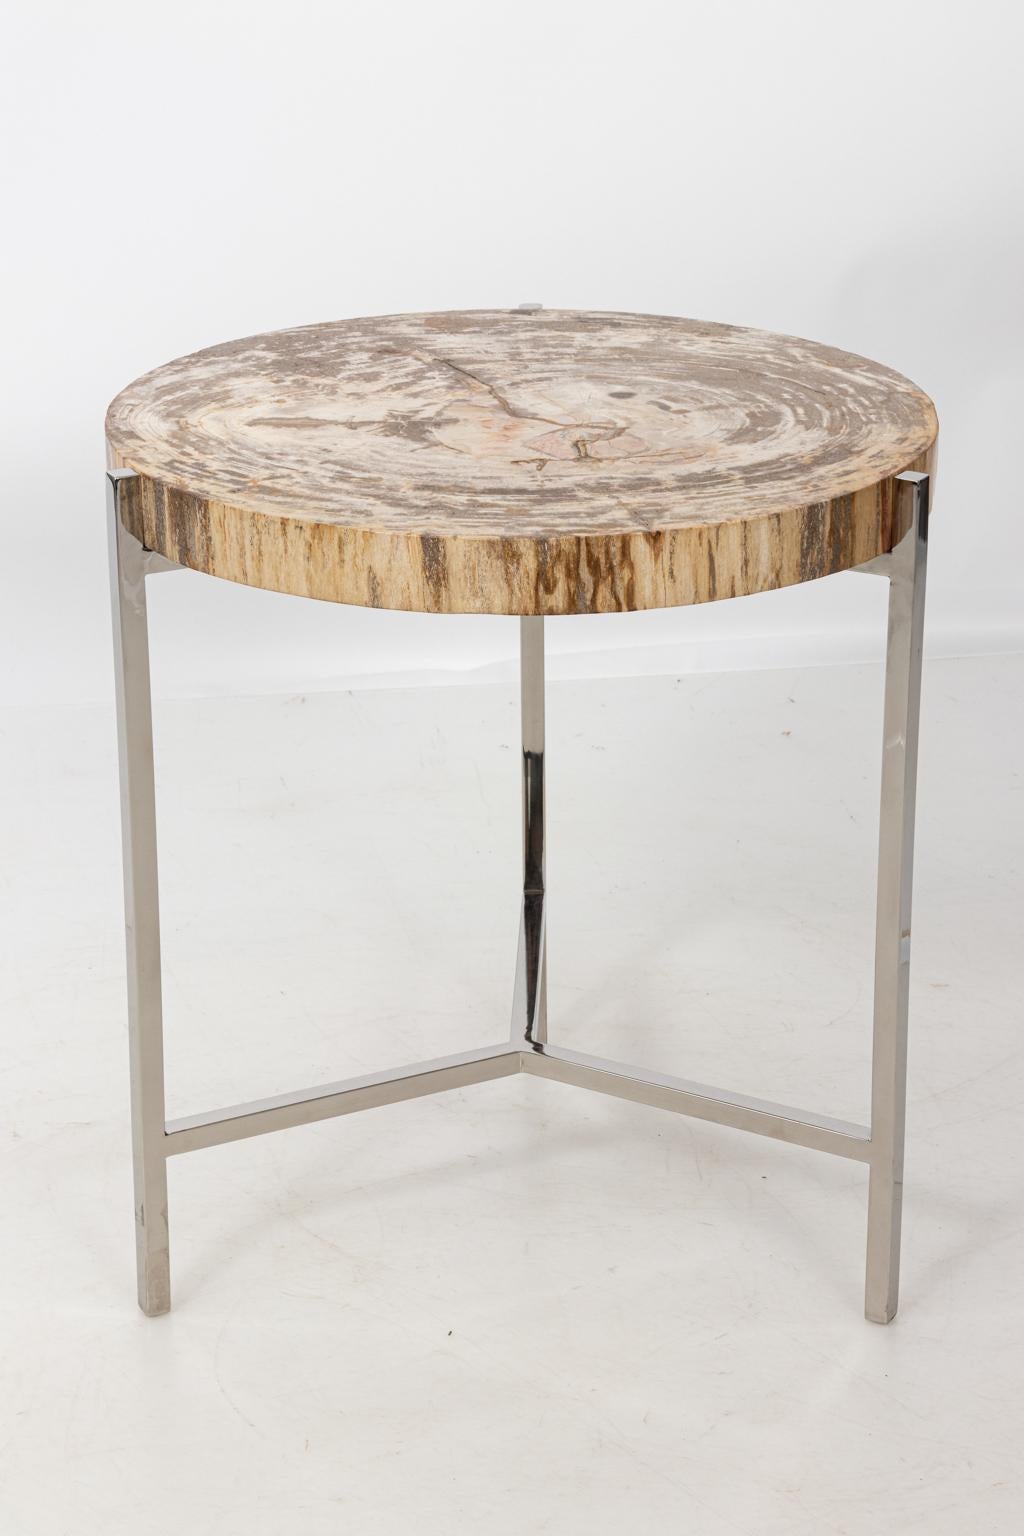 Contemporary petrified wood side table by Palececk Maxwell with metal base. Please note of wear consistent with age.